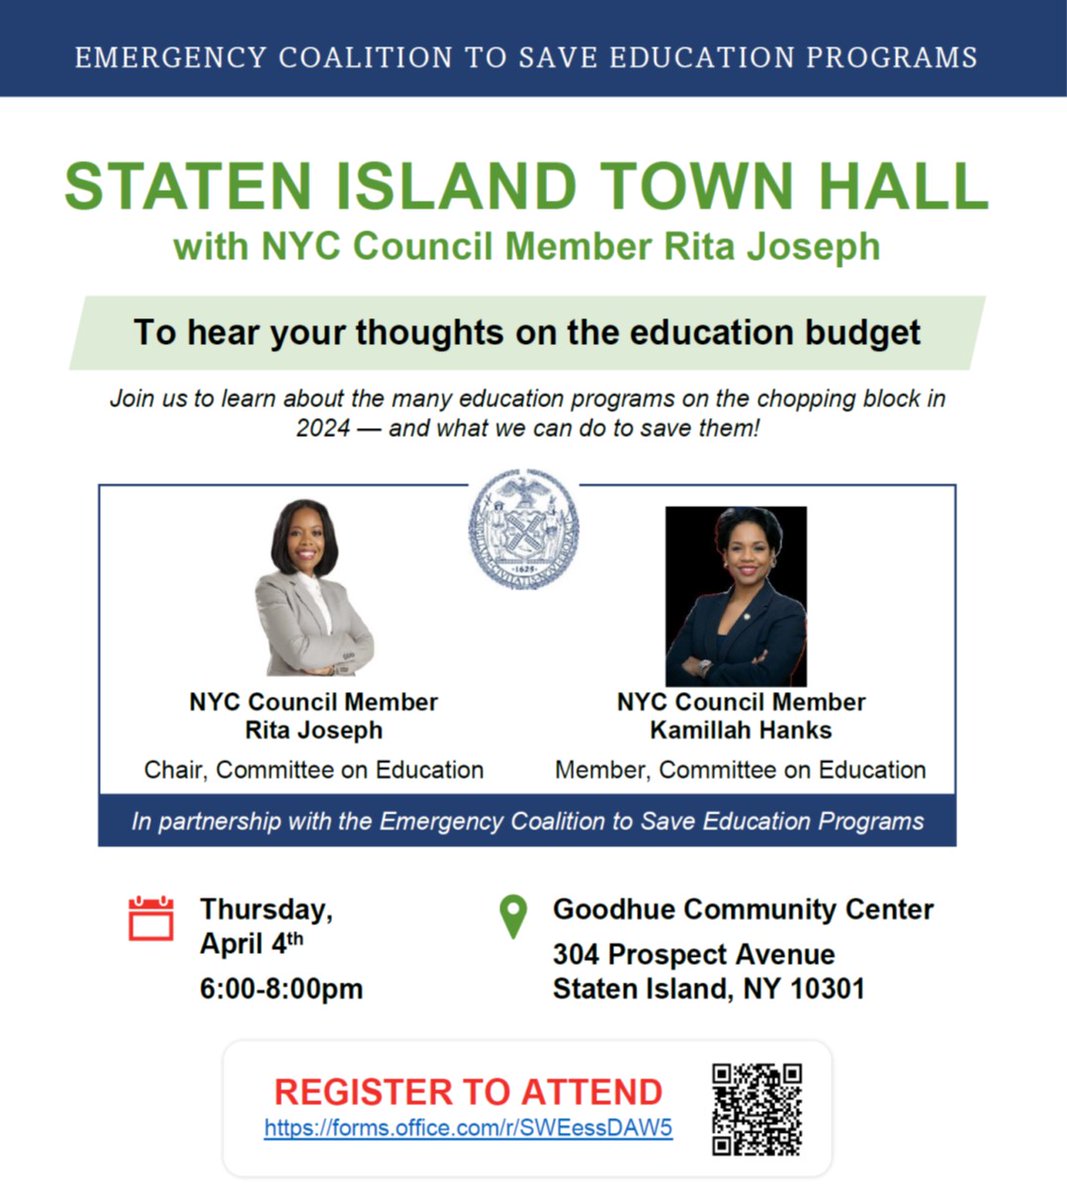 Please join @CMRitaJoseph, @KamillahMHanks, parents, students, & the Emergency Coalition to Save Education Programs on 4/4 for a Staten Island Town Hall on the education budget. Many important education programs are on the chopping block. Register at forms.office.com/r/SWEessDAW5